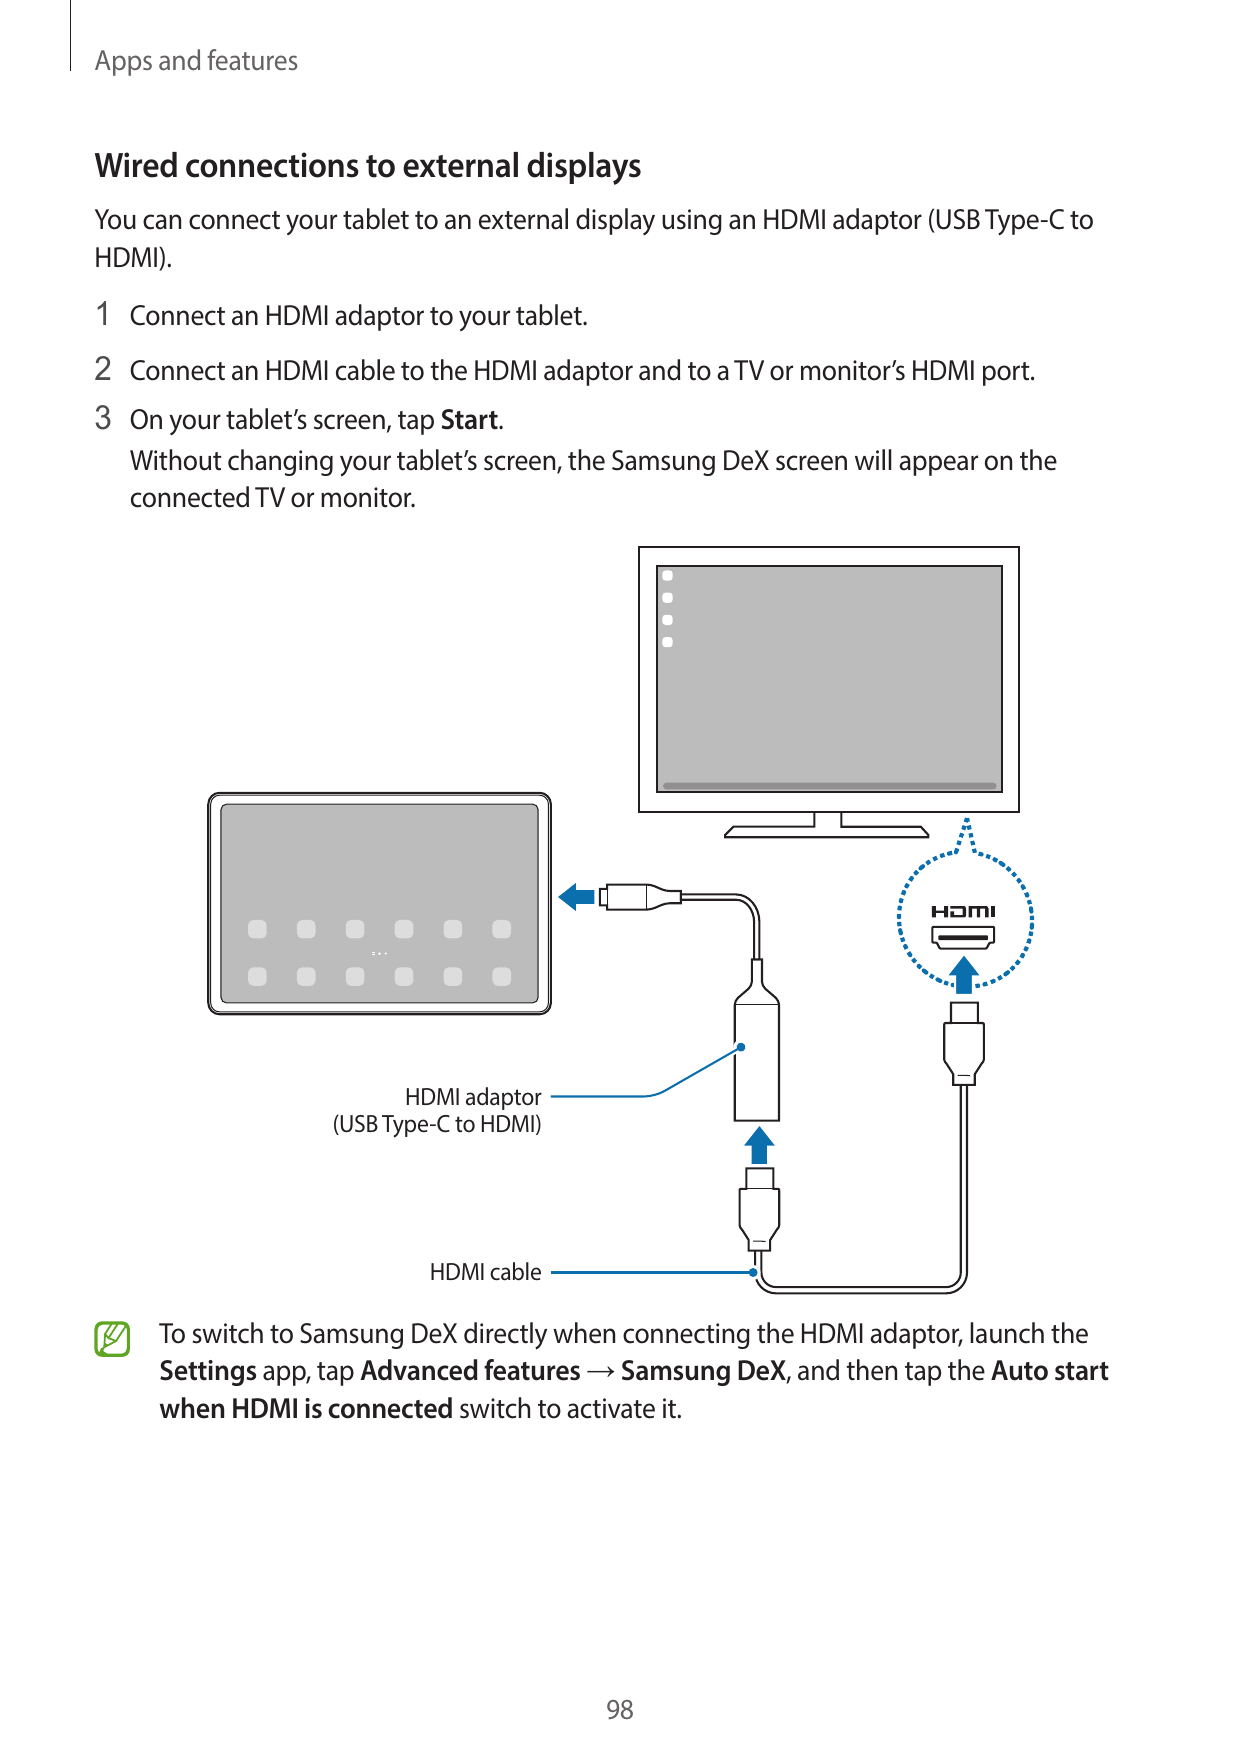 Apps and featuresWired connections to external displaysYou can connect your tablet to an external display using an HDMI adaptor 